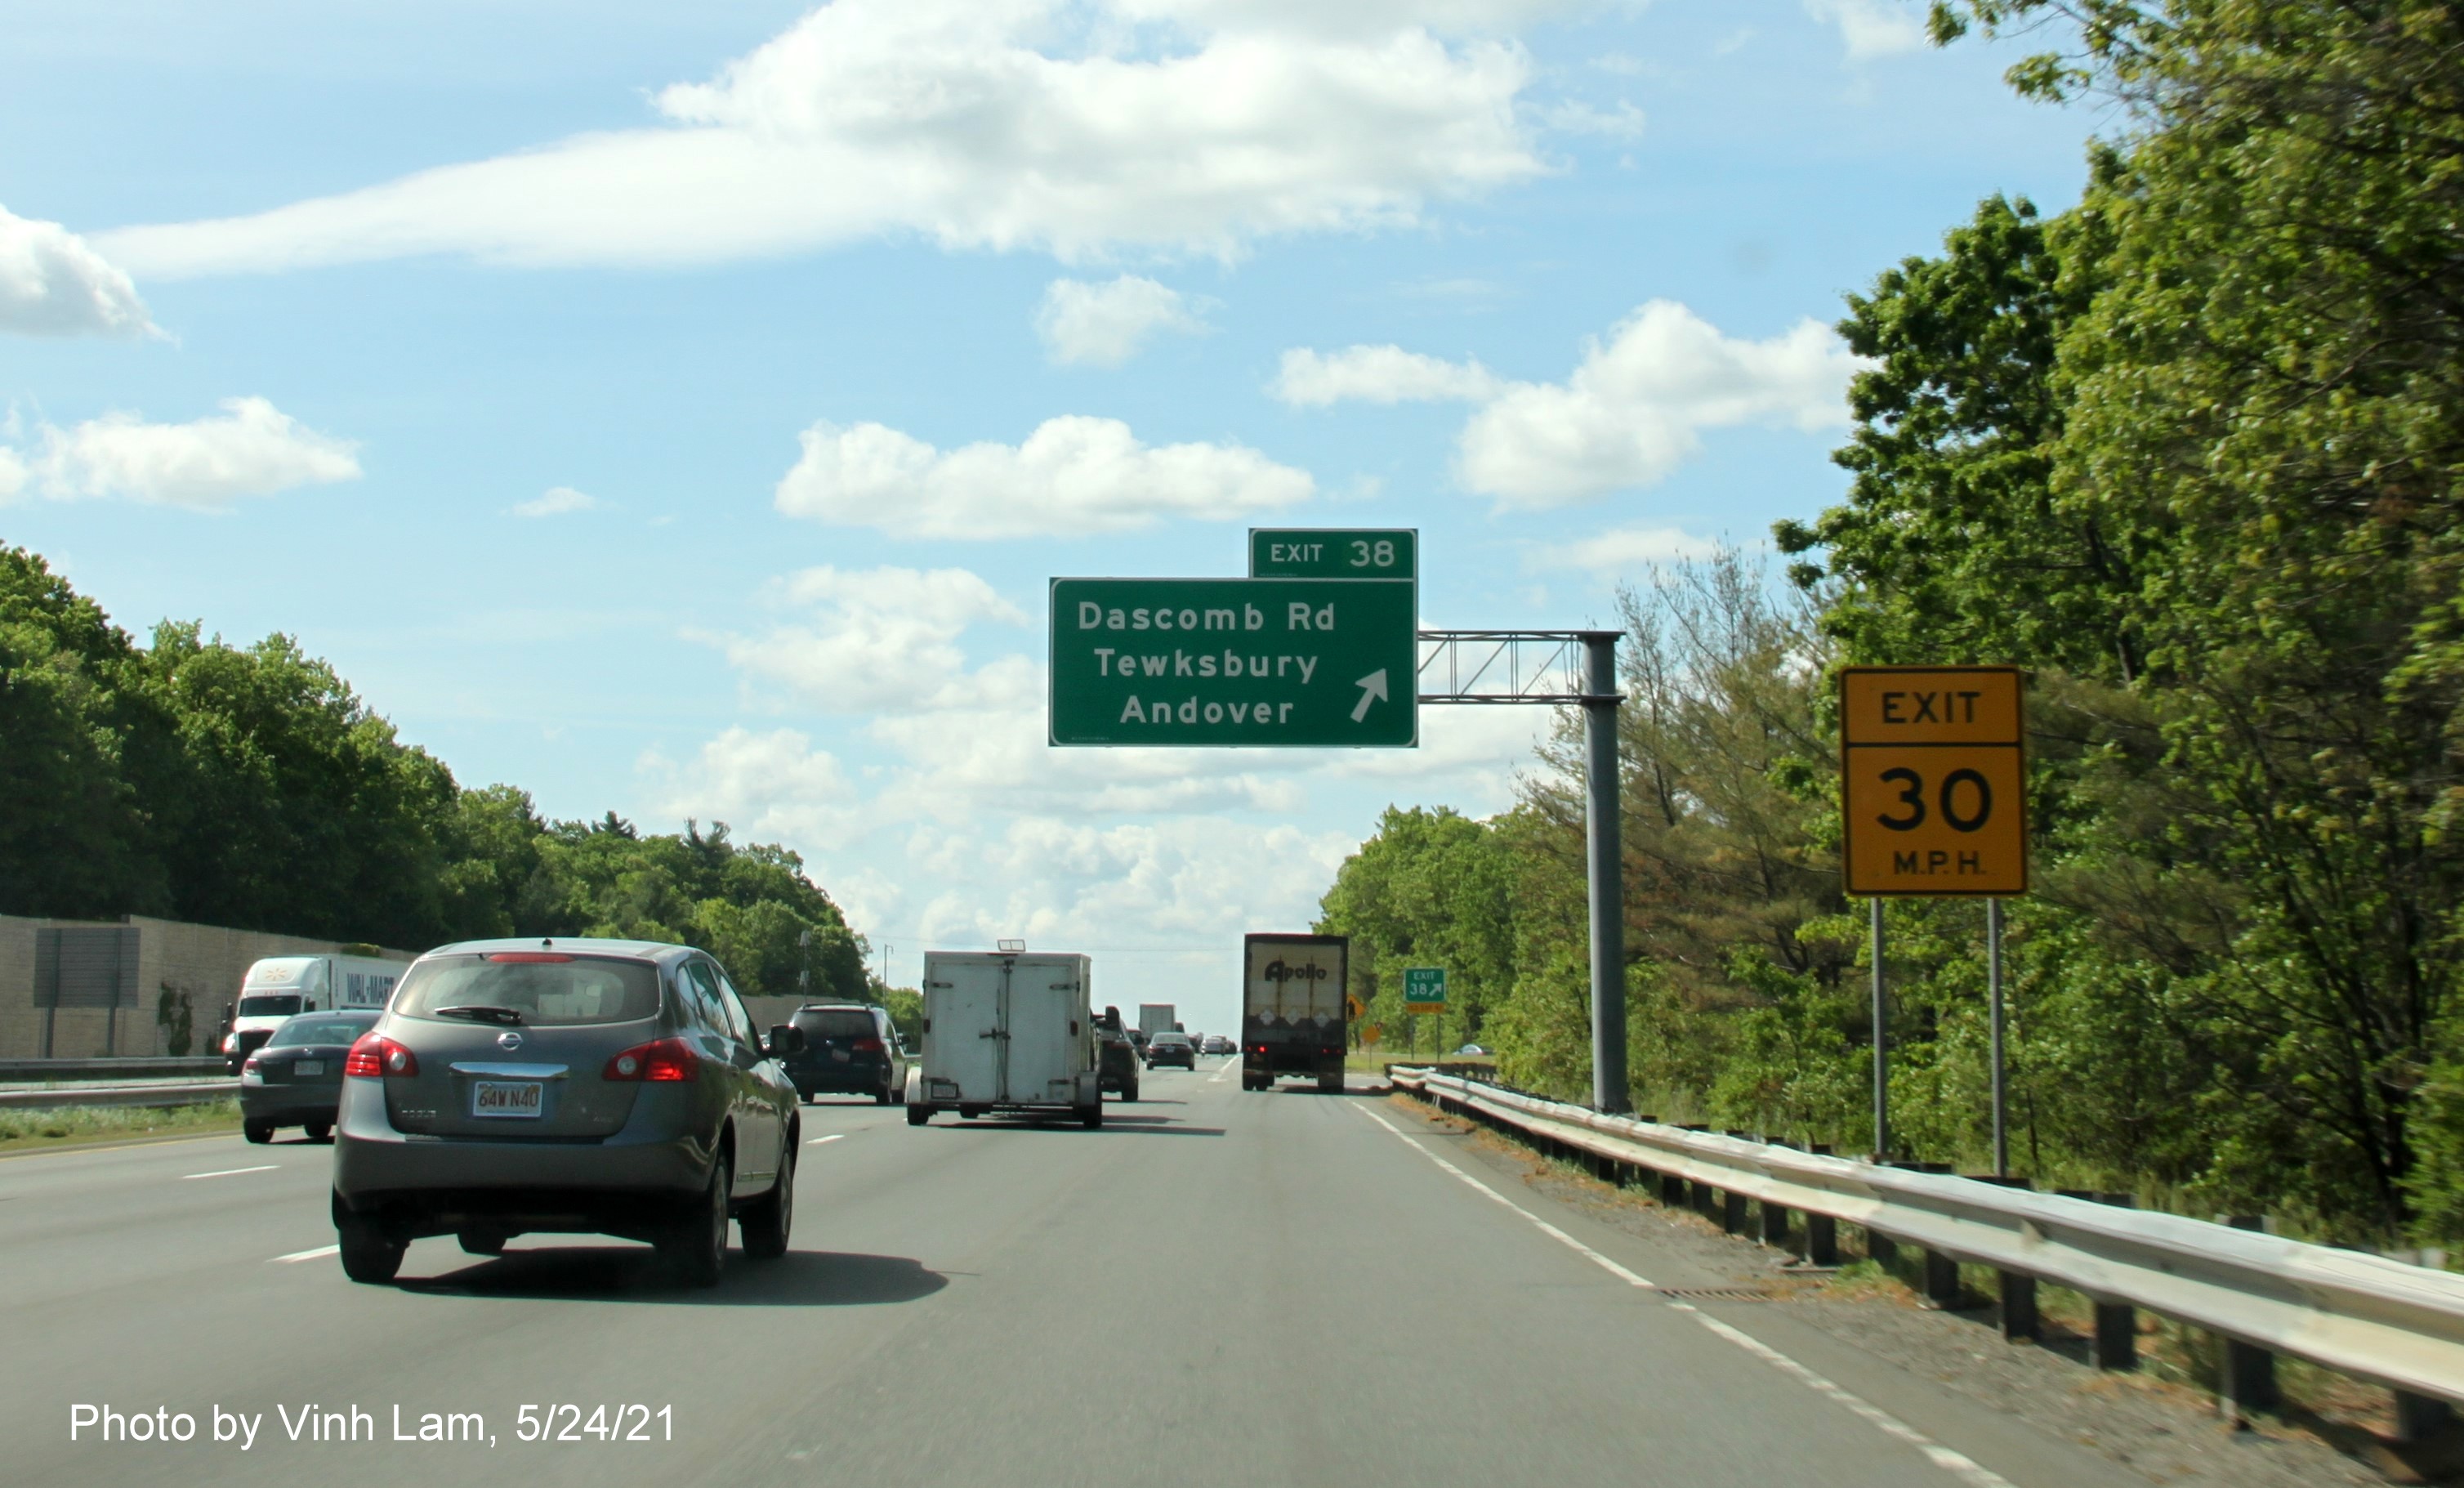 Image of overhead ramp sign for Dascomb Road exit with new milepost based exit number on I-93 South in Andover, by Vinh Lam, May 2021 